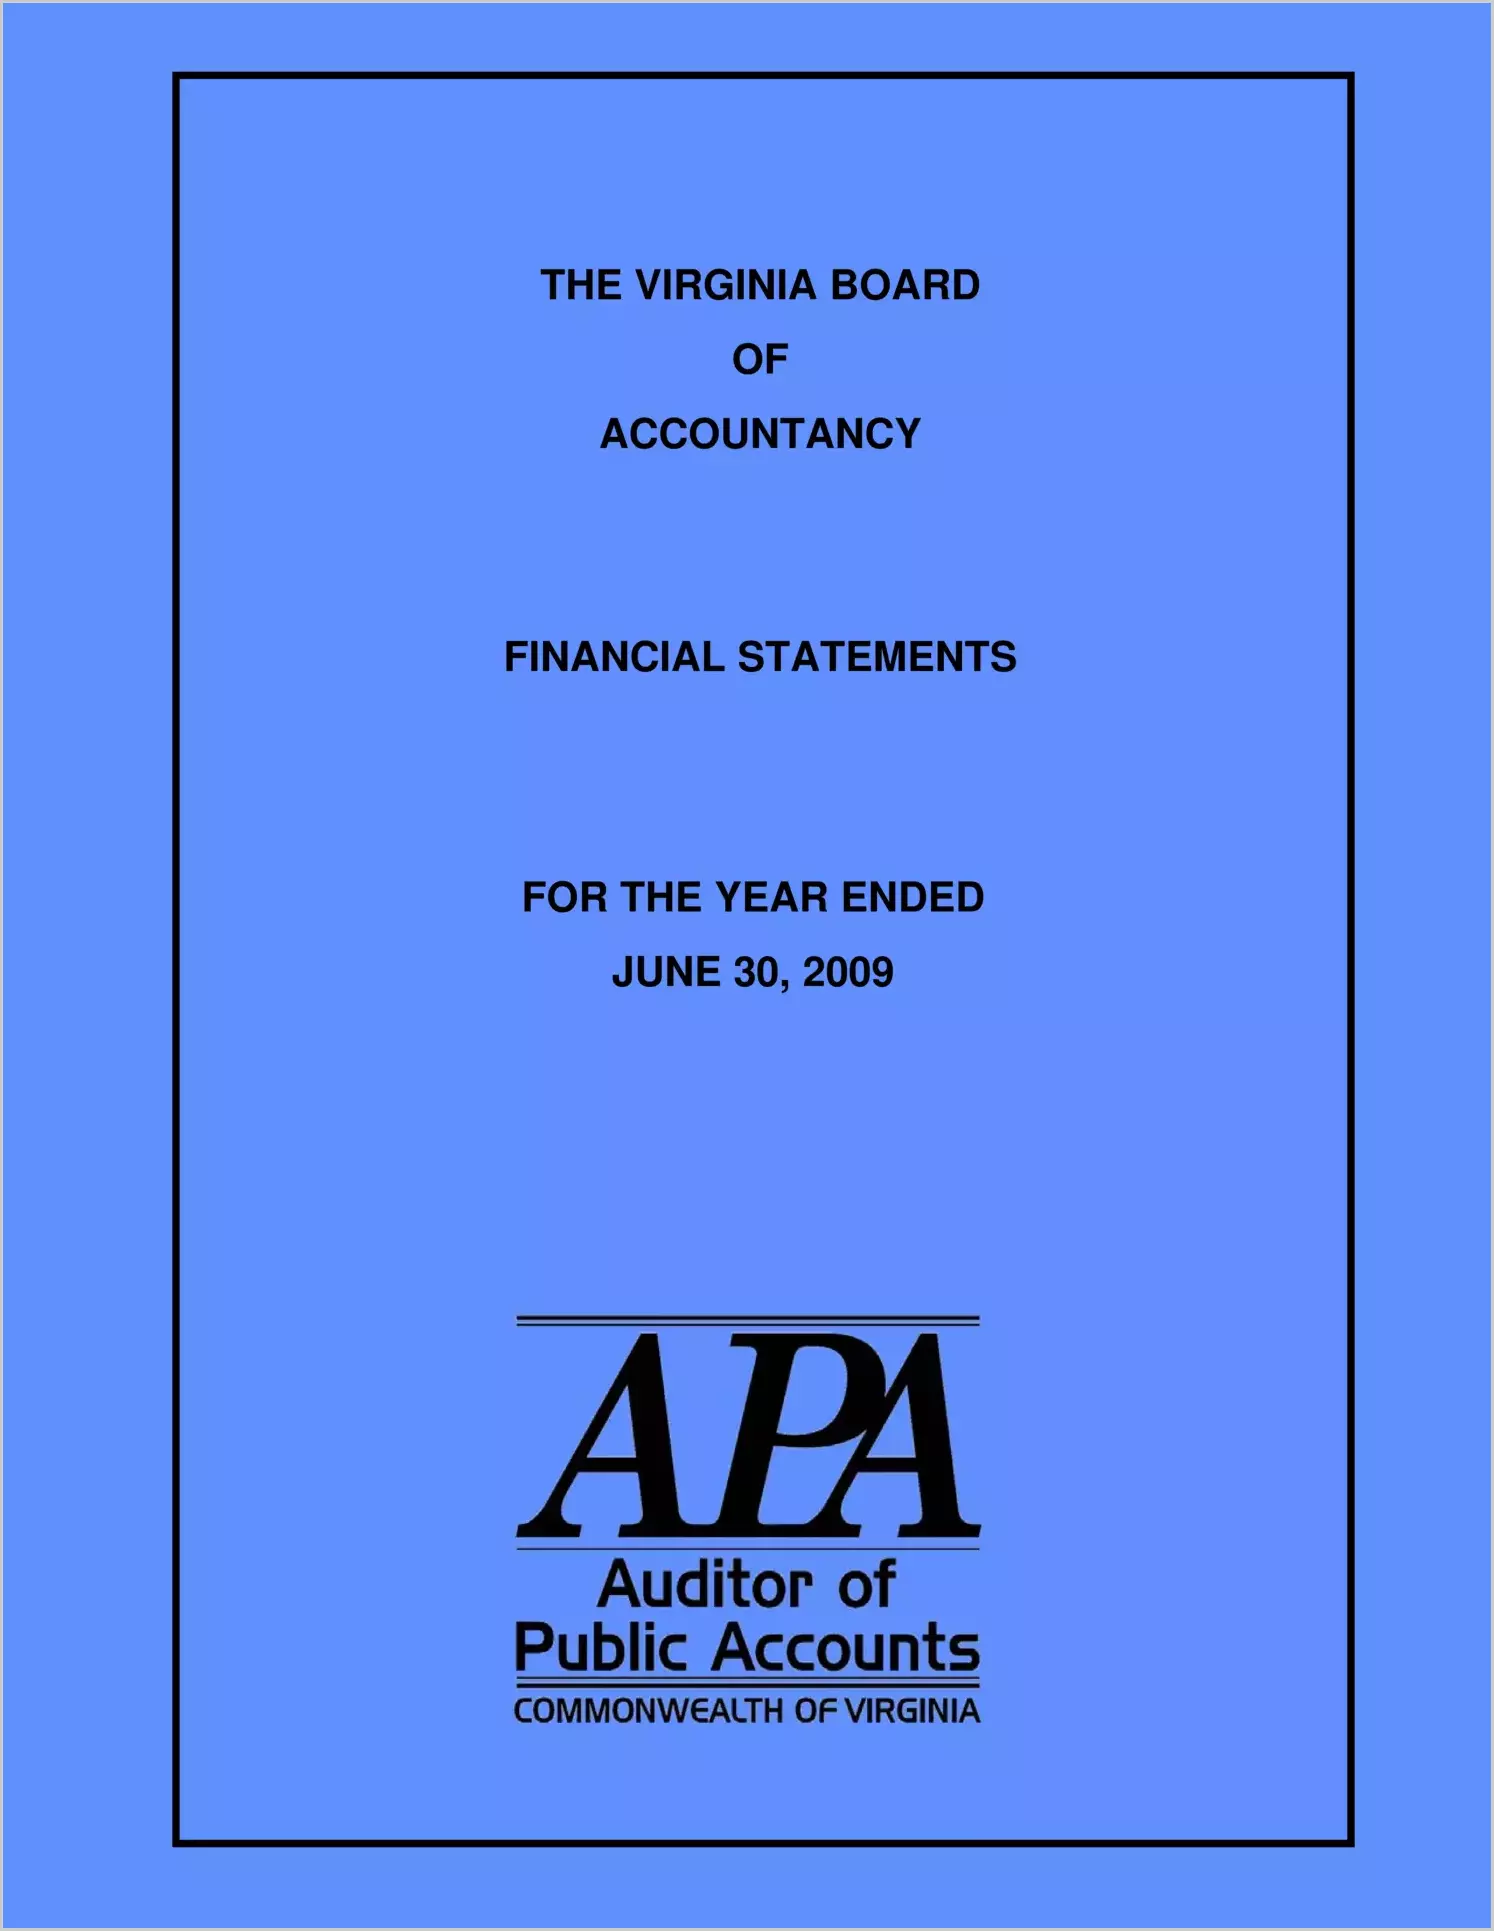 Virginia Board of Accountancy for the year ended June 30, 2009